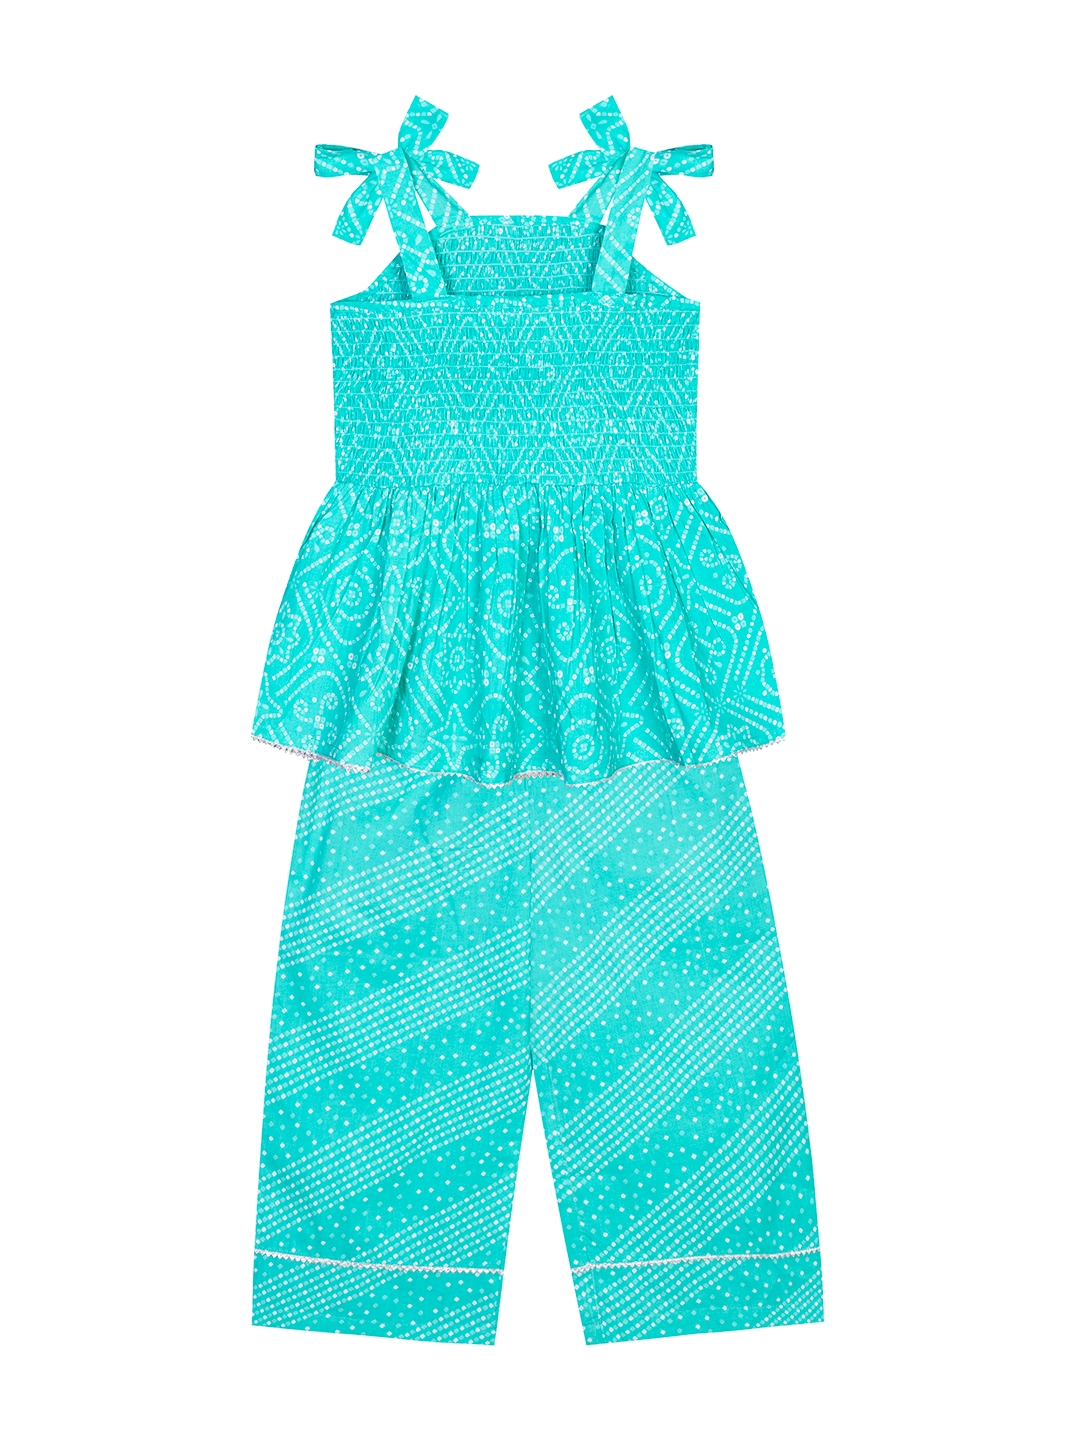 Budding Bees Infants Cotton Top-Pajama Set with Matching Hairband-Green